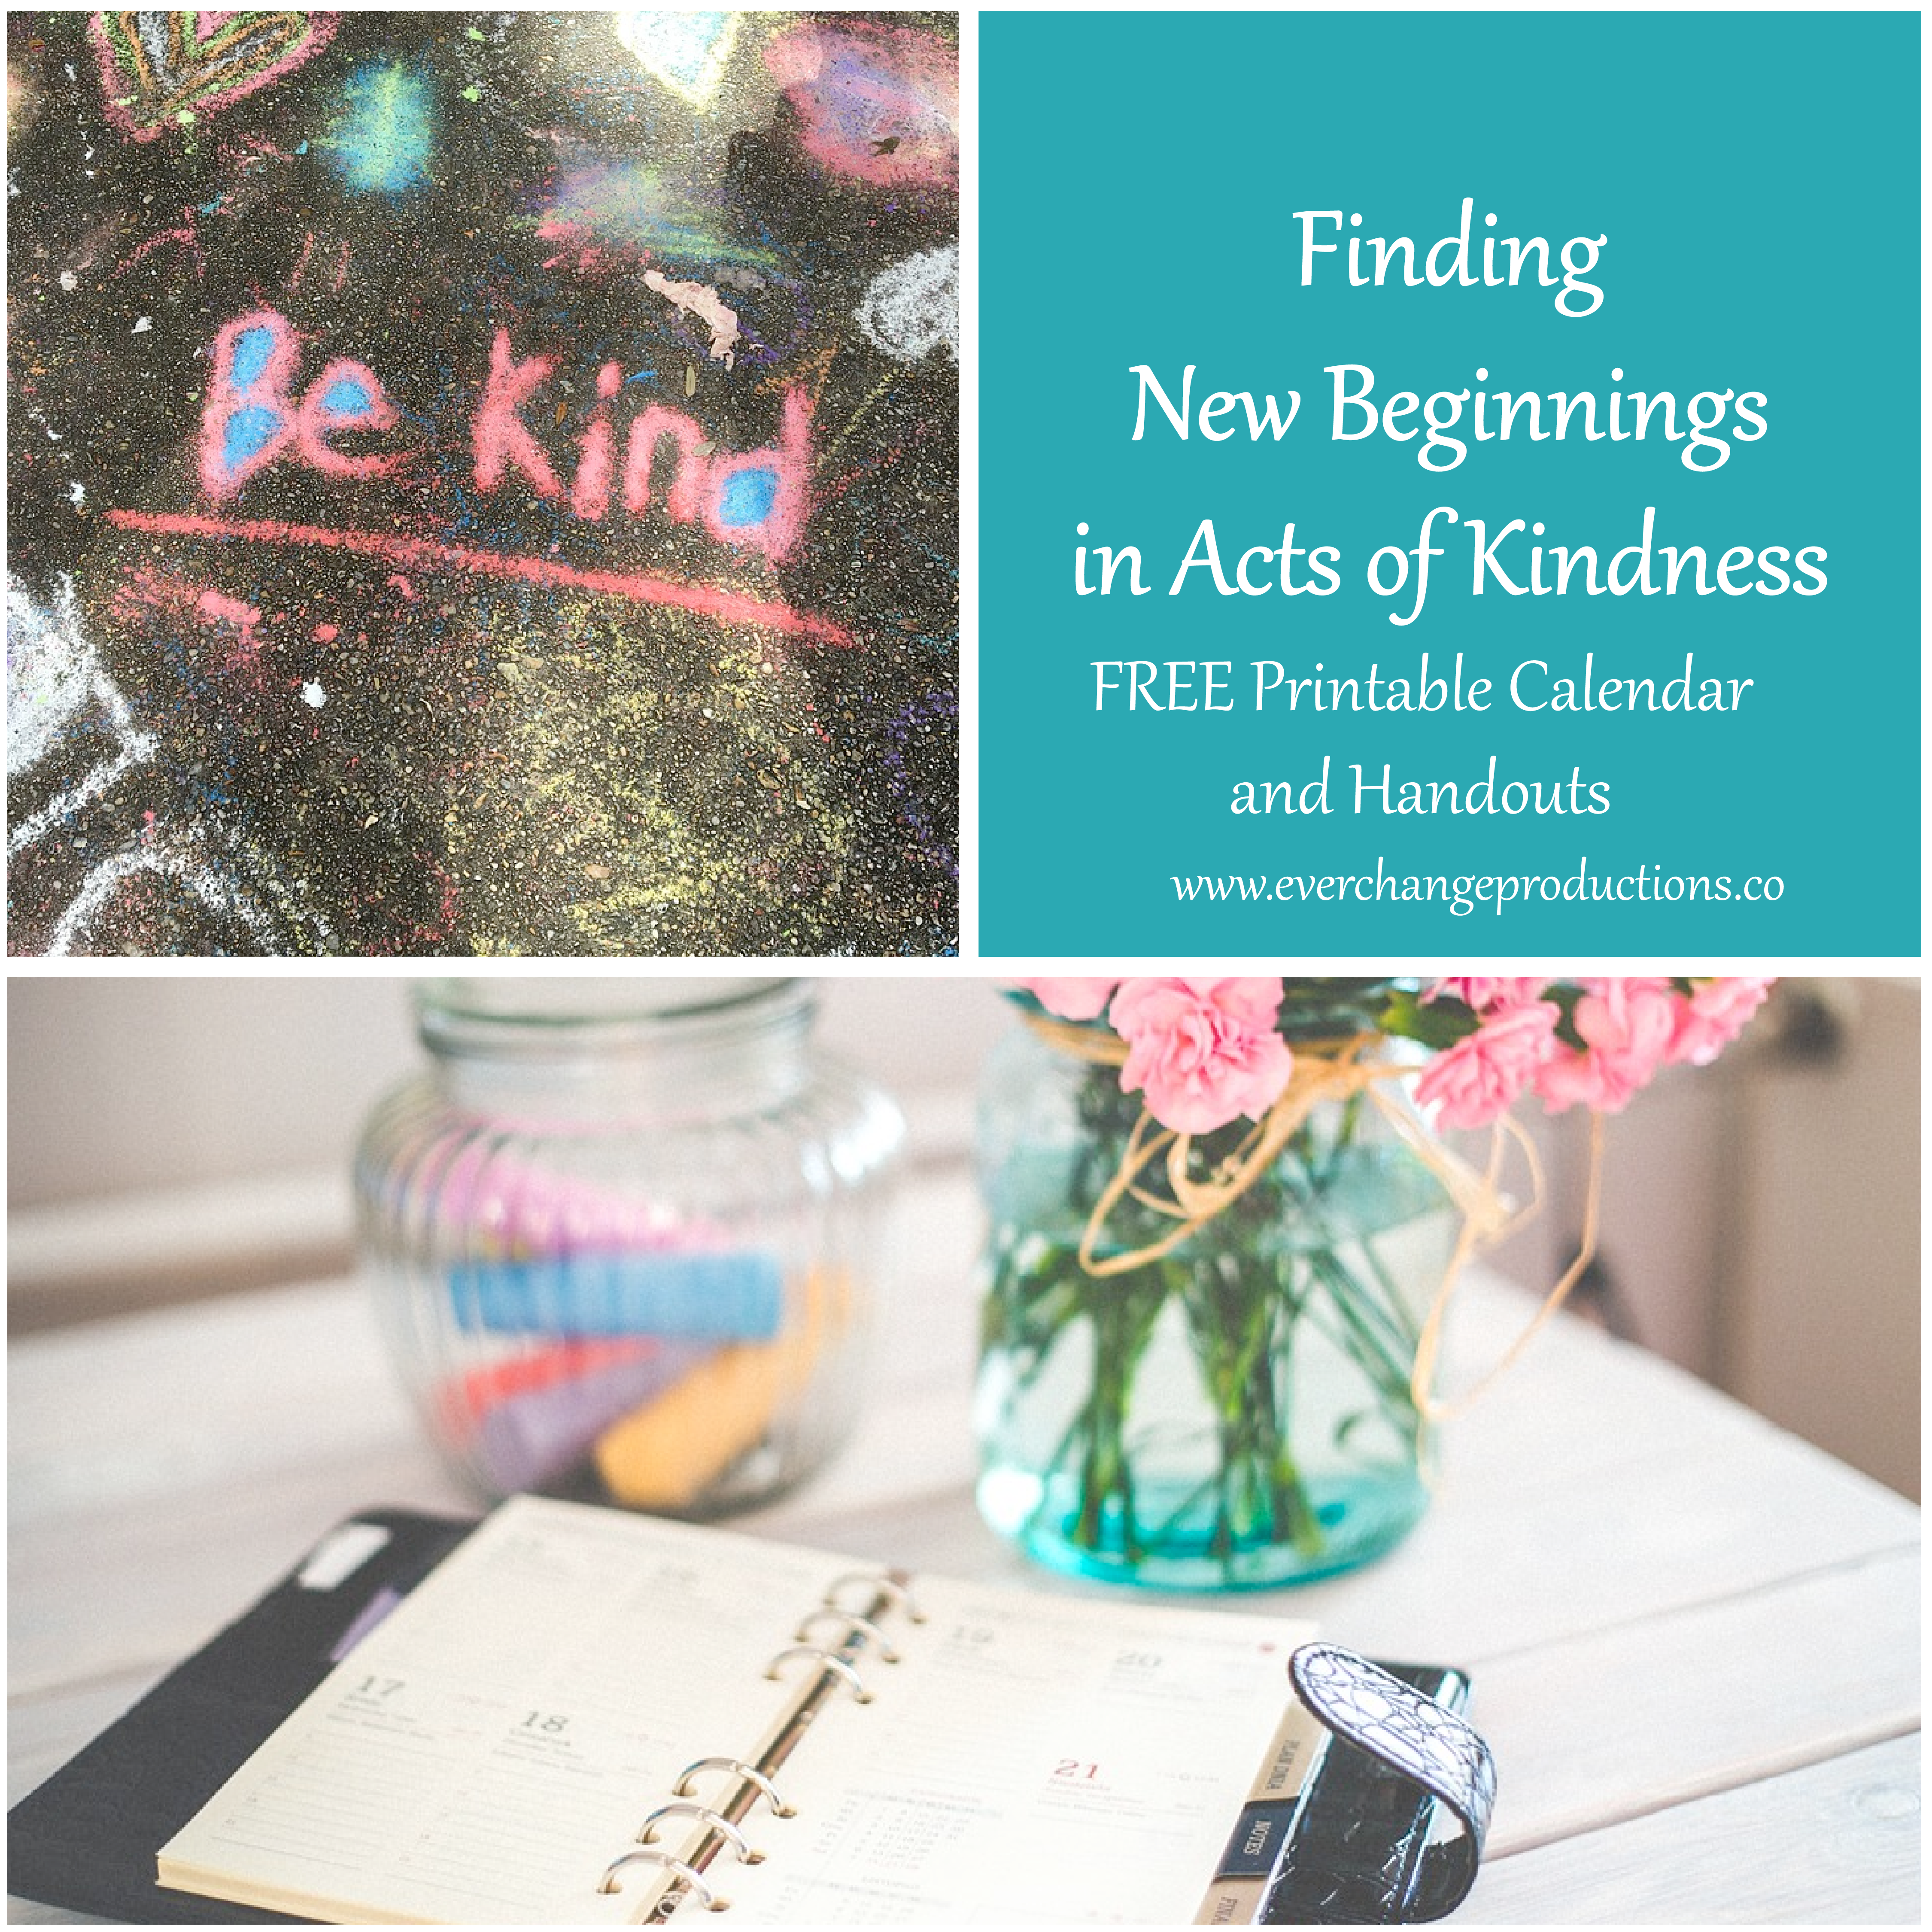 The New Year always brings me hope. Despite being in a sorrowful ending, I feel joy as I am finding new beginnings in acts of kindness.